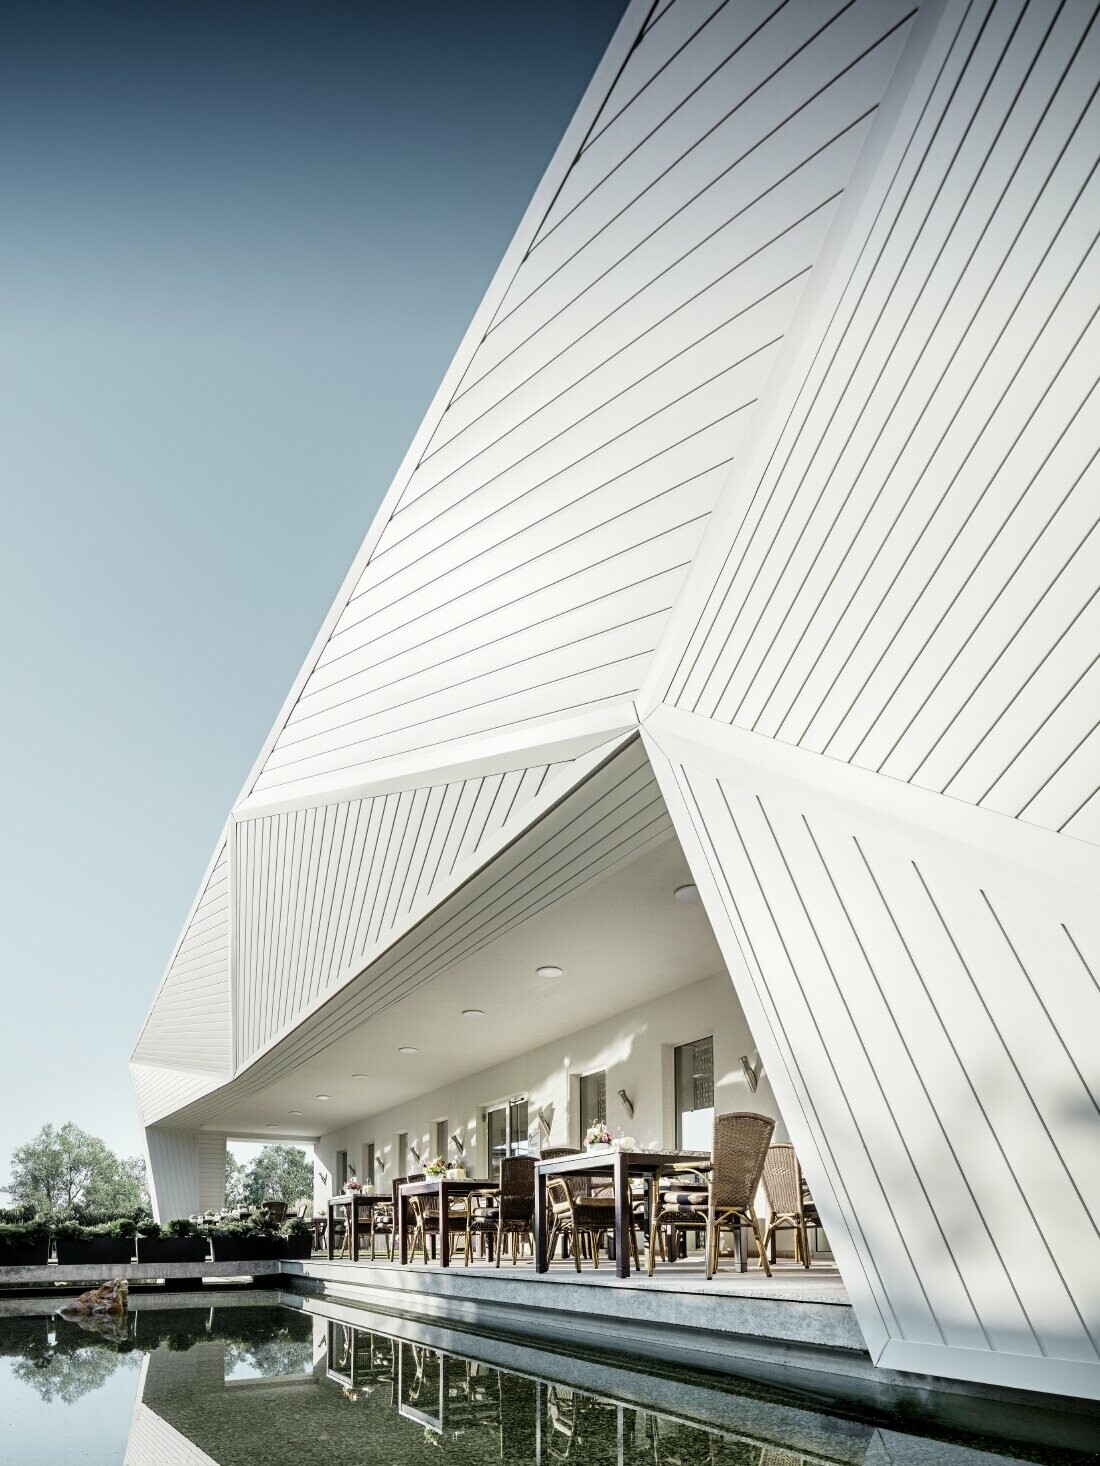 The 3D façade of the Mimama restaurant in Budapest was clad in the PREFA sidings in Prefa white.